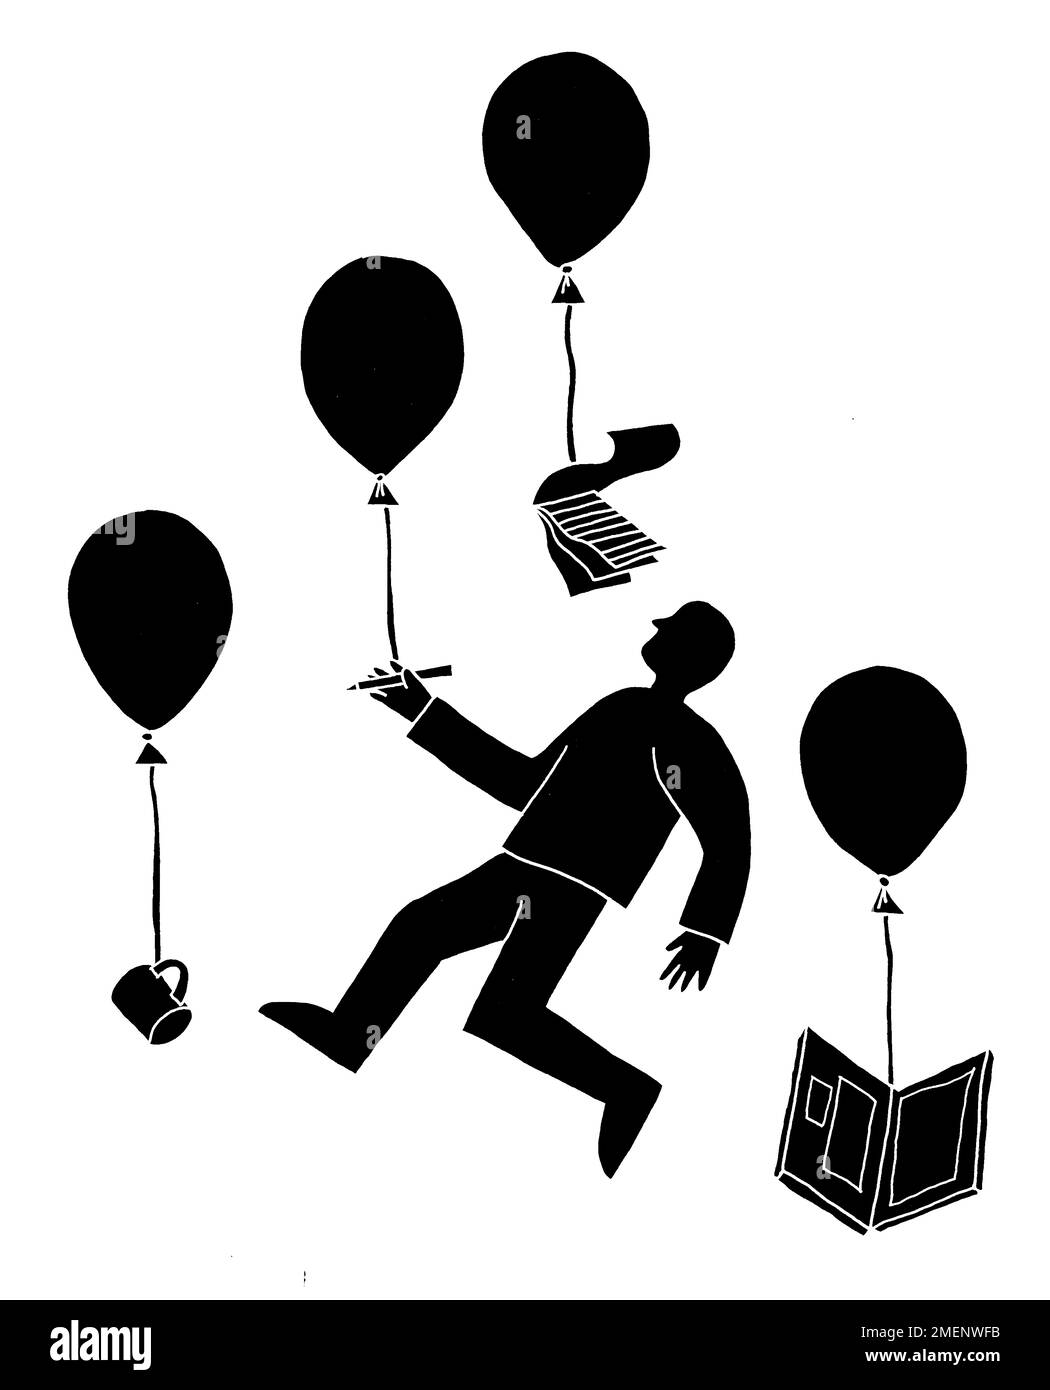 Black and white illustration of man and office equipment attached to balloons floating in the air Stock Photo